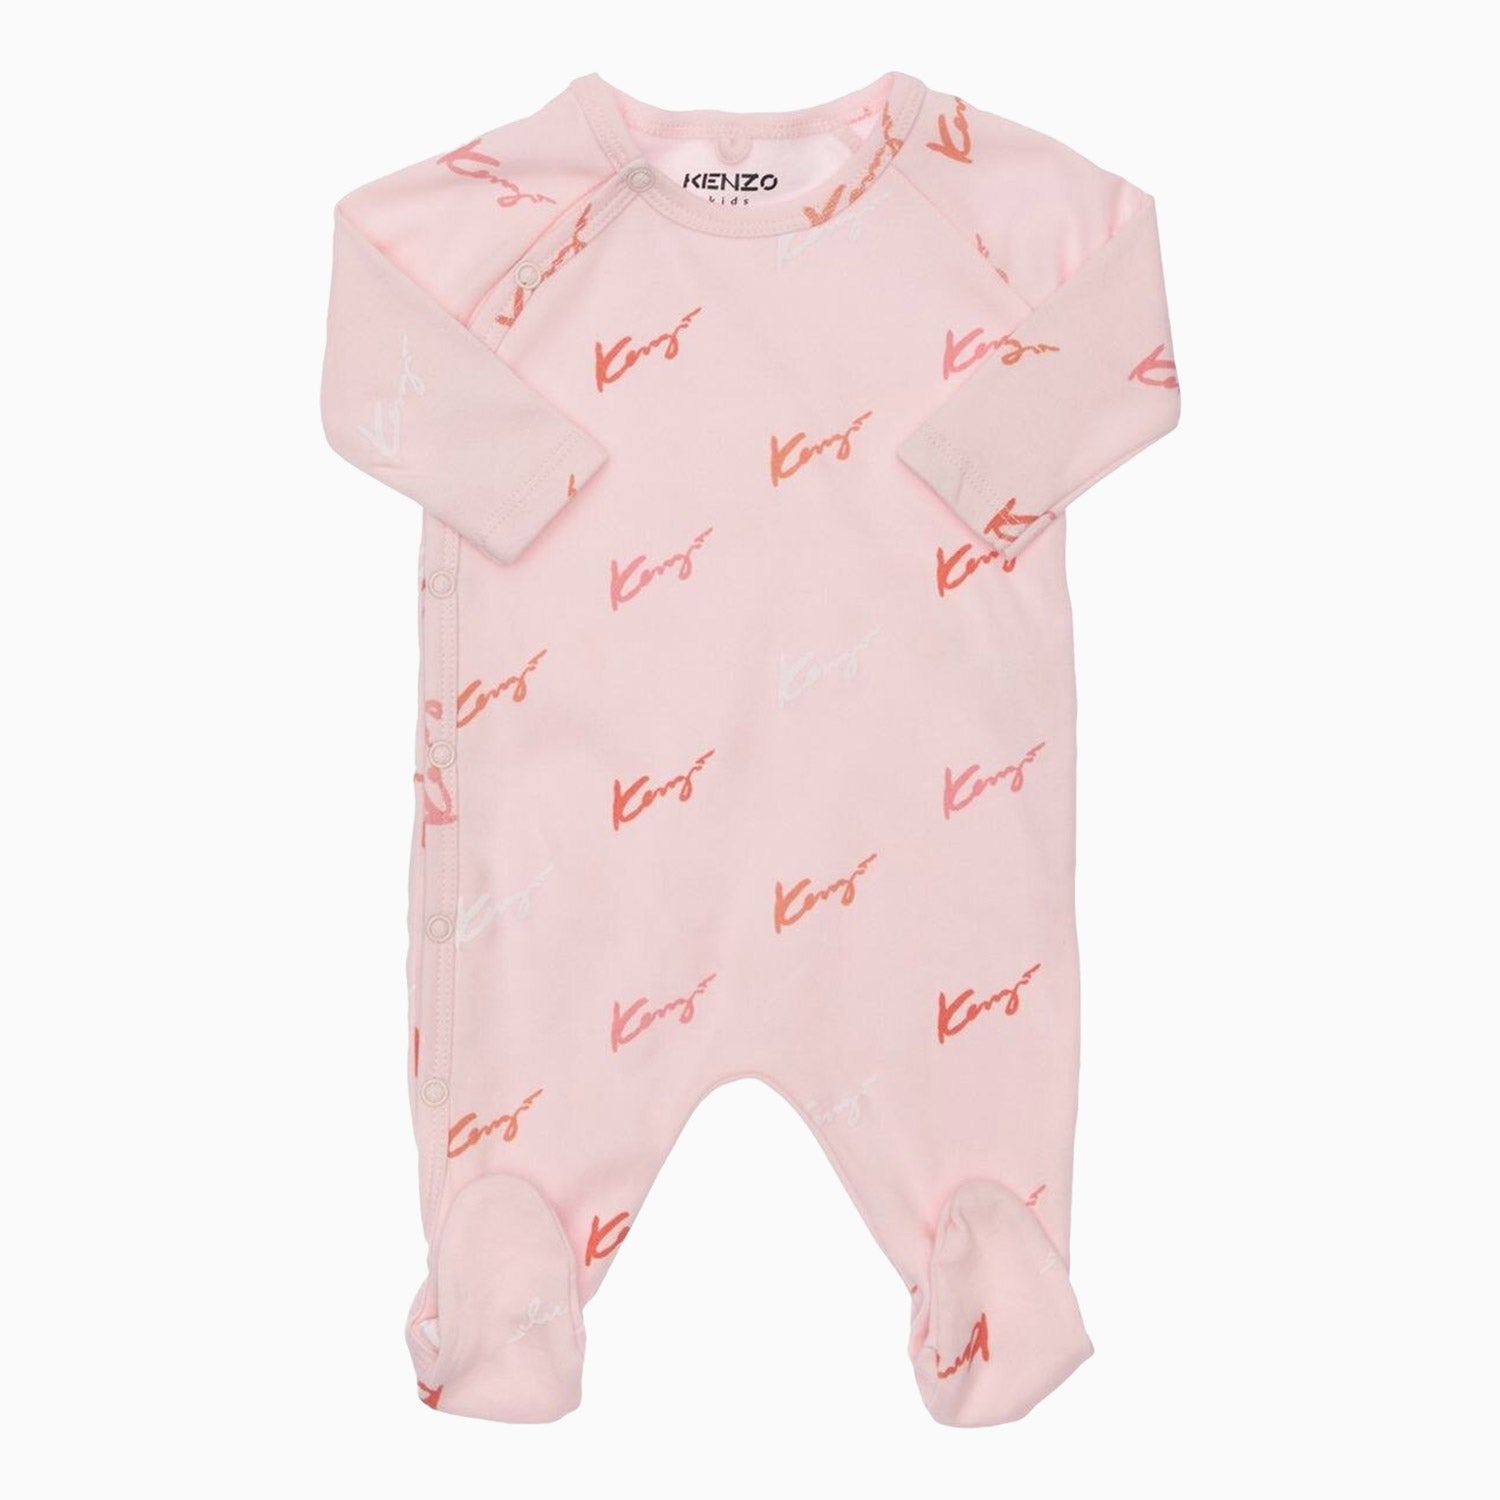 Kenzo Kid's Logo Print Outfit - Color: Pale Pink - Kids Premium Clothing -